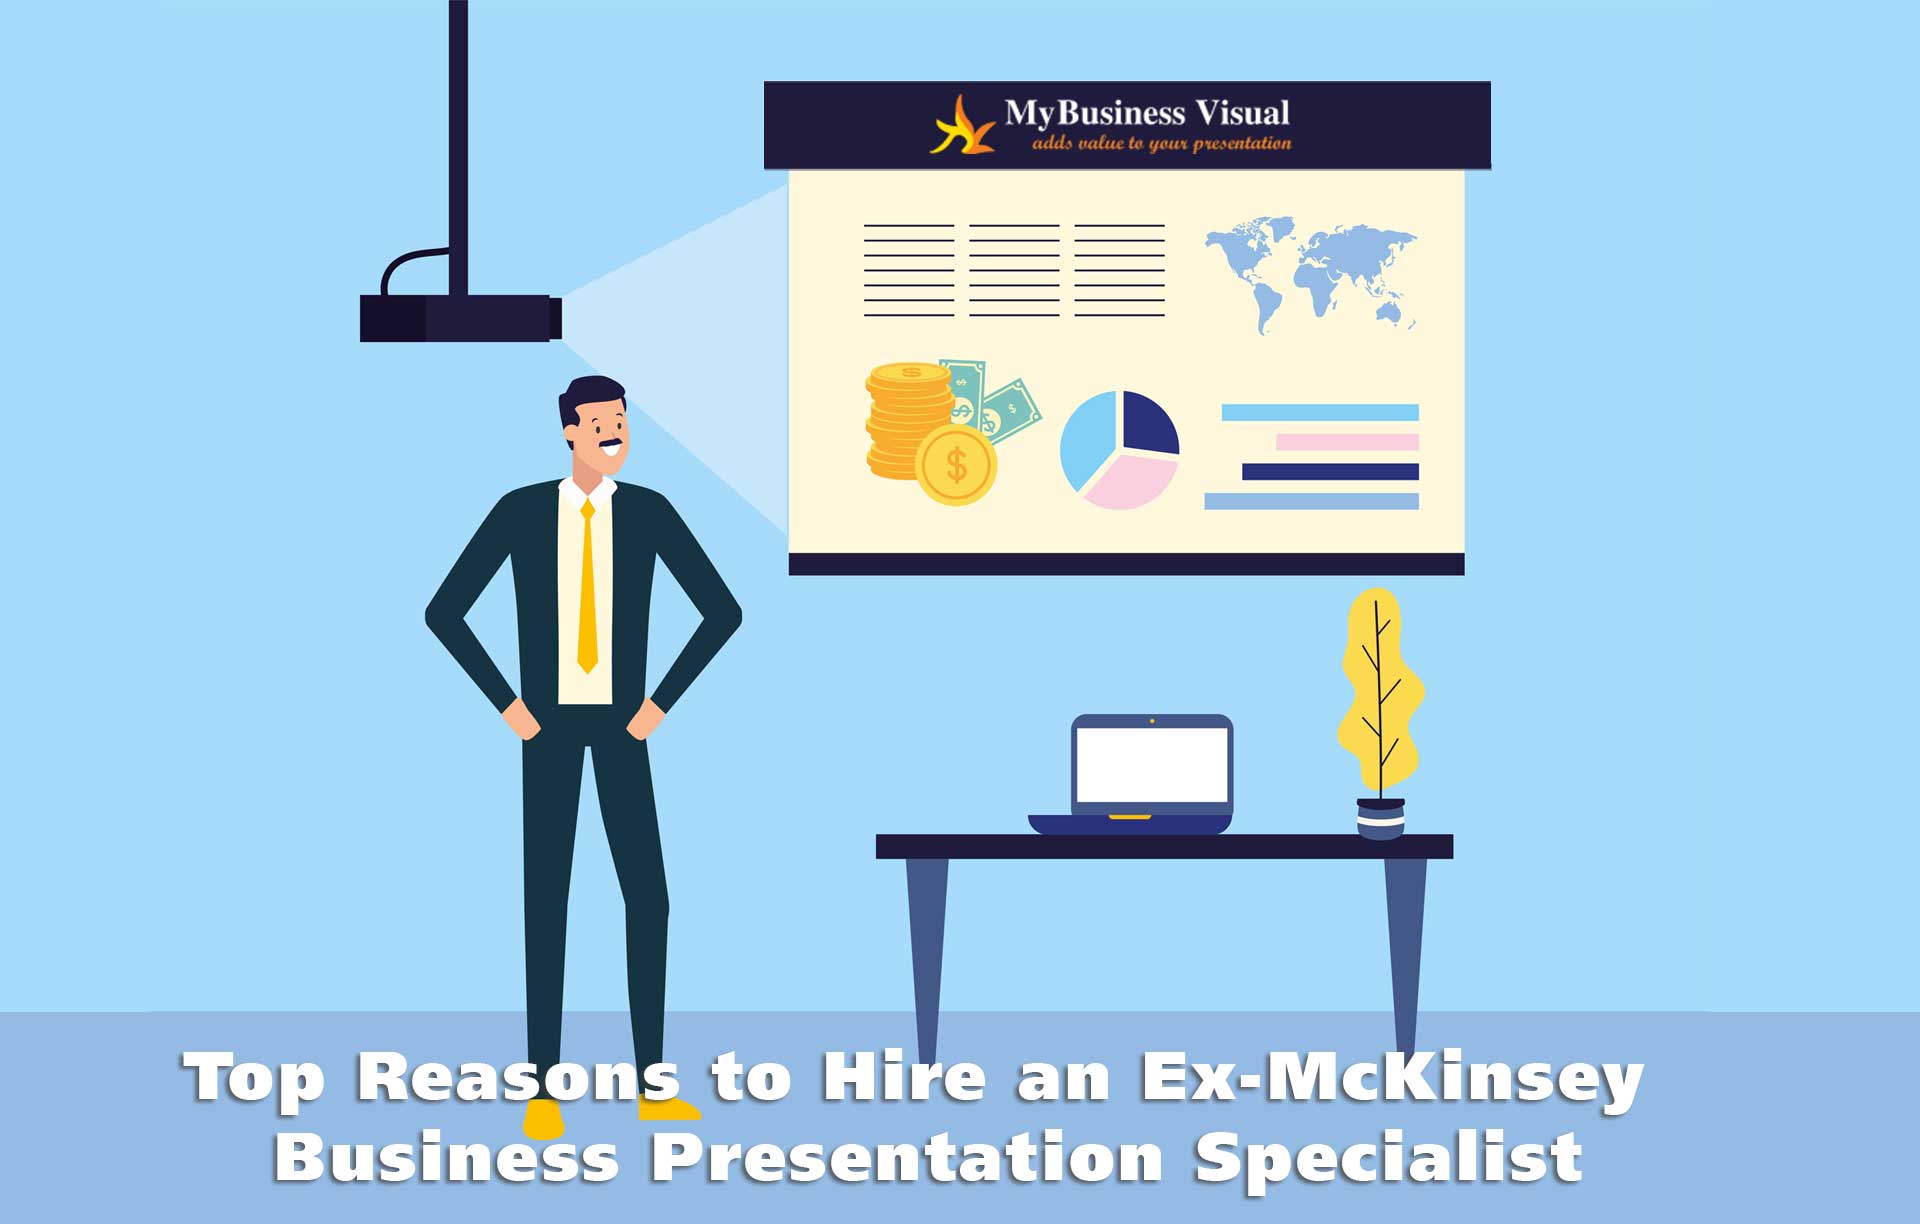 Top Reasons to Hire an Ex-McKinsey Business Presentation Specialist